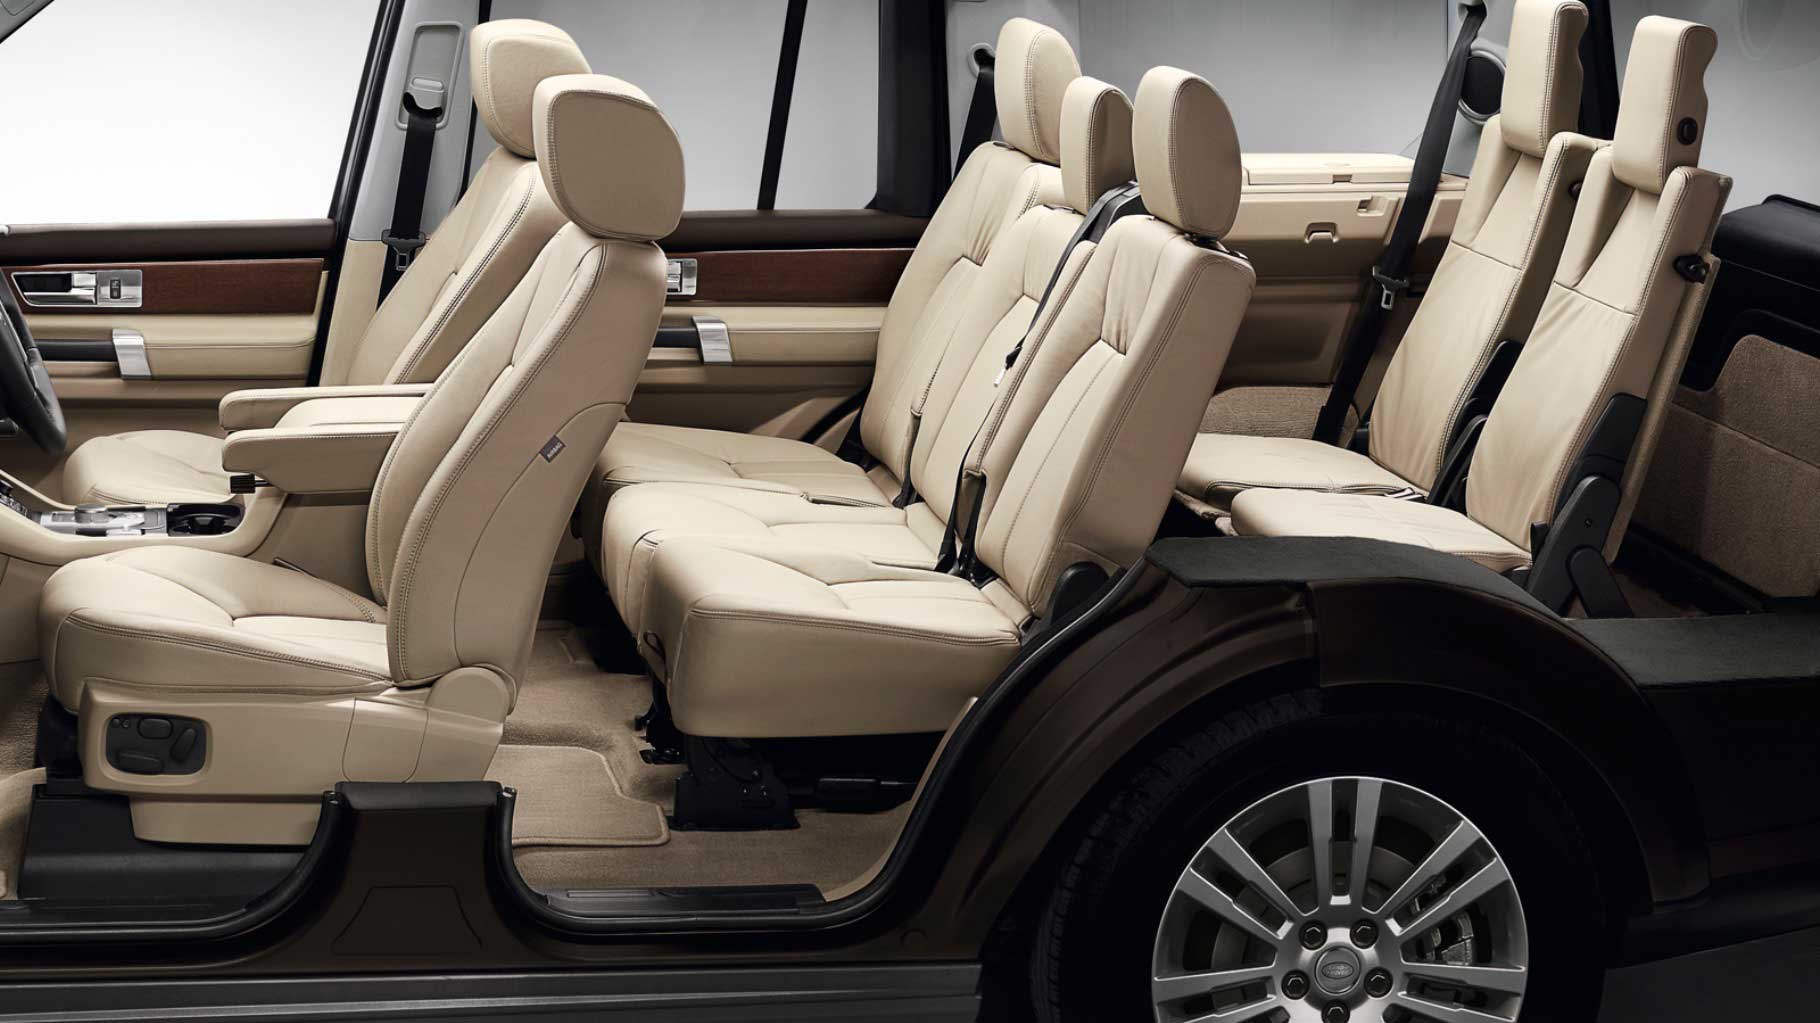 Land Rover Lr4 Hse Interior Image Gallery Pictures Photos